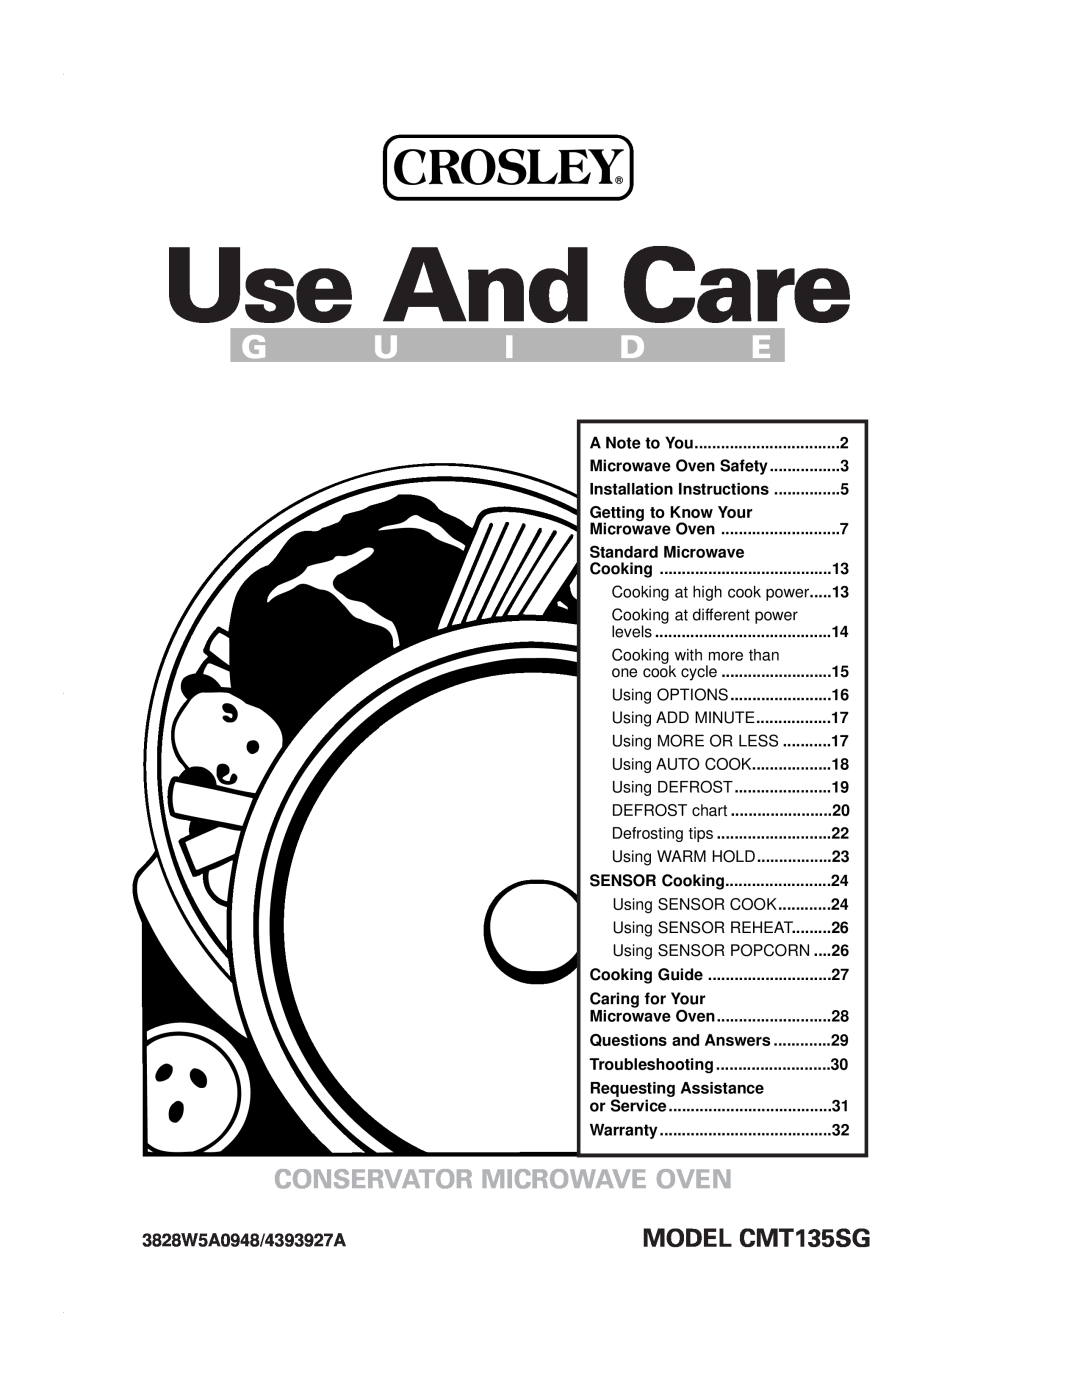 Crosley installation instructions Use And Care, G U I D E, Conservator Microwave Oven, MODEL CMT135SG 